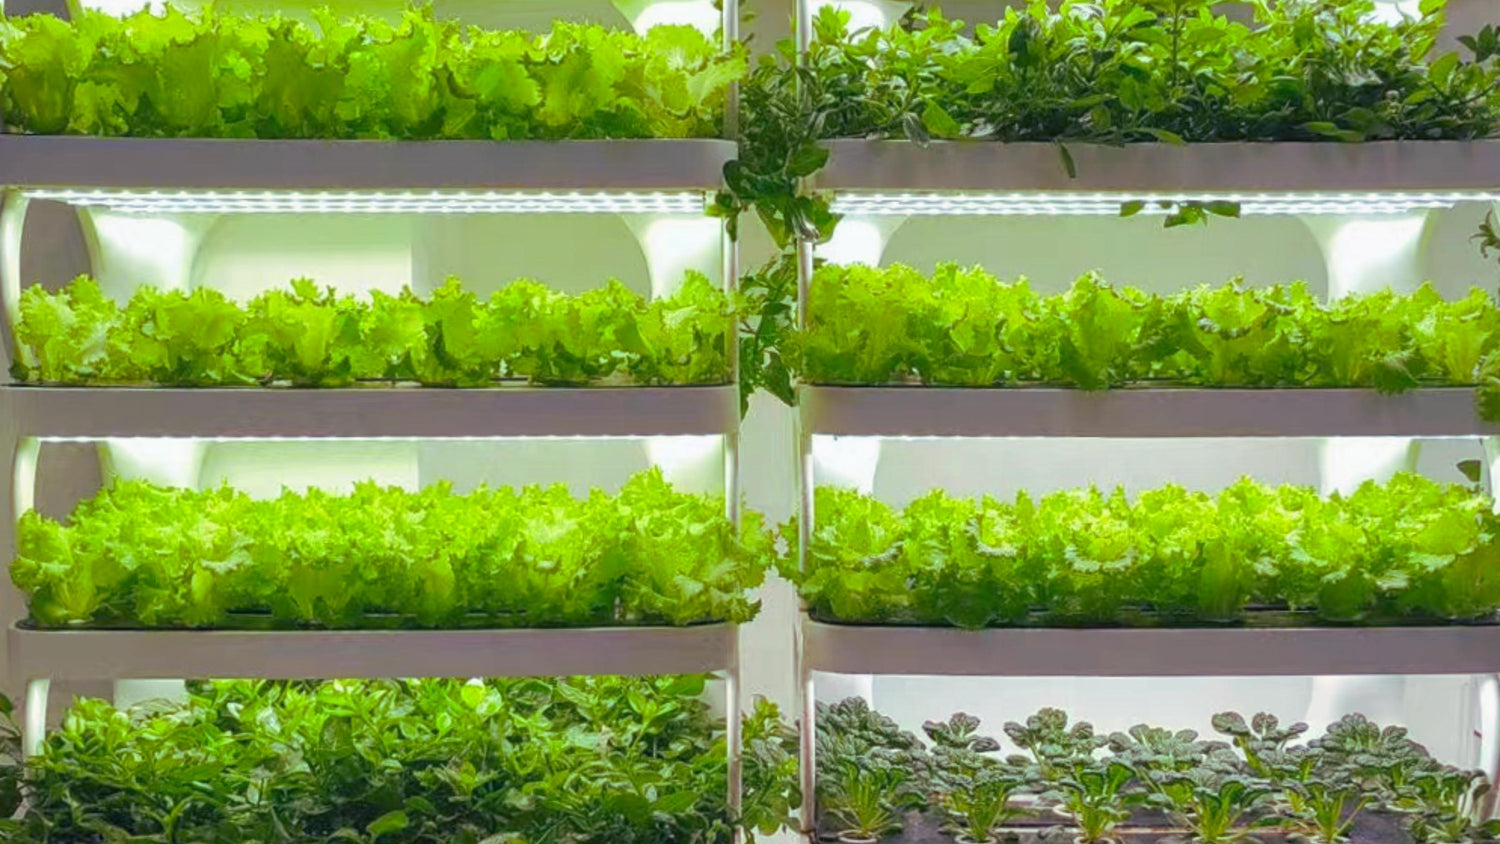 organic vegetable hydroponics grow system for home, office, cafe and indoors